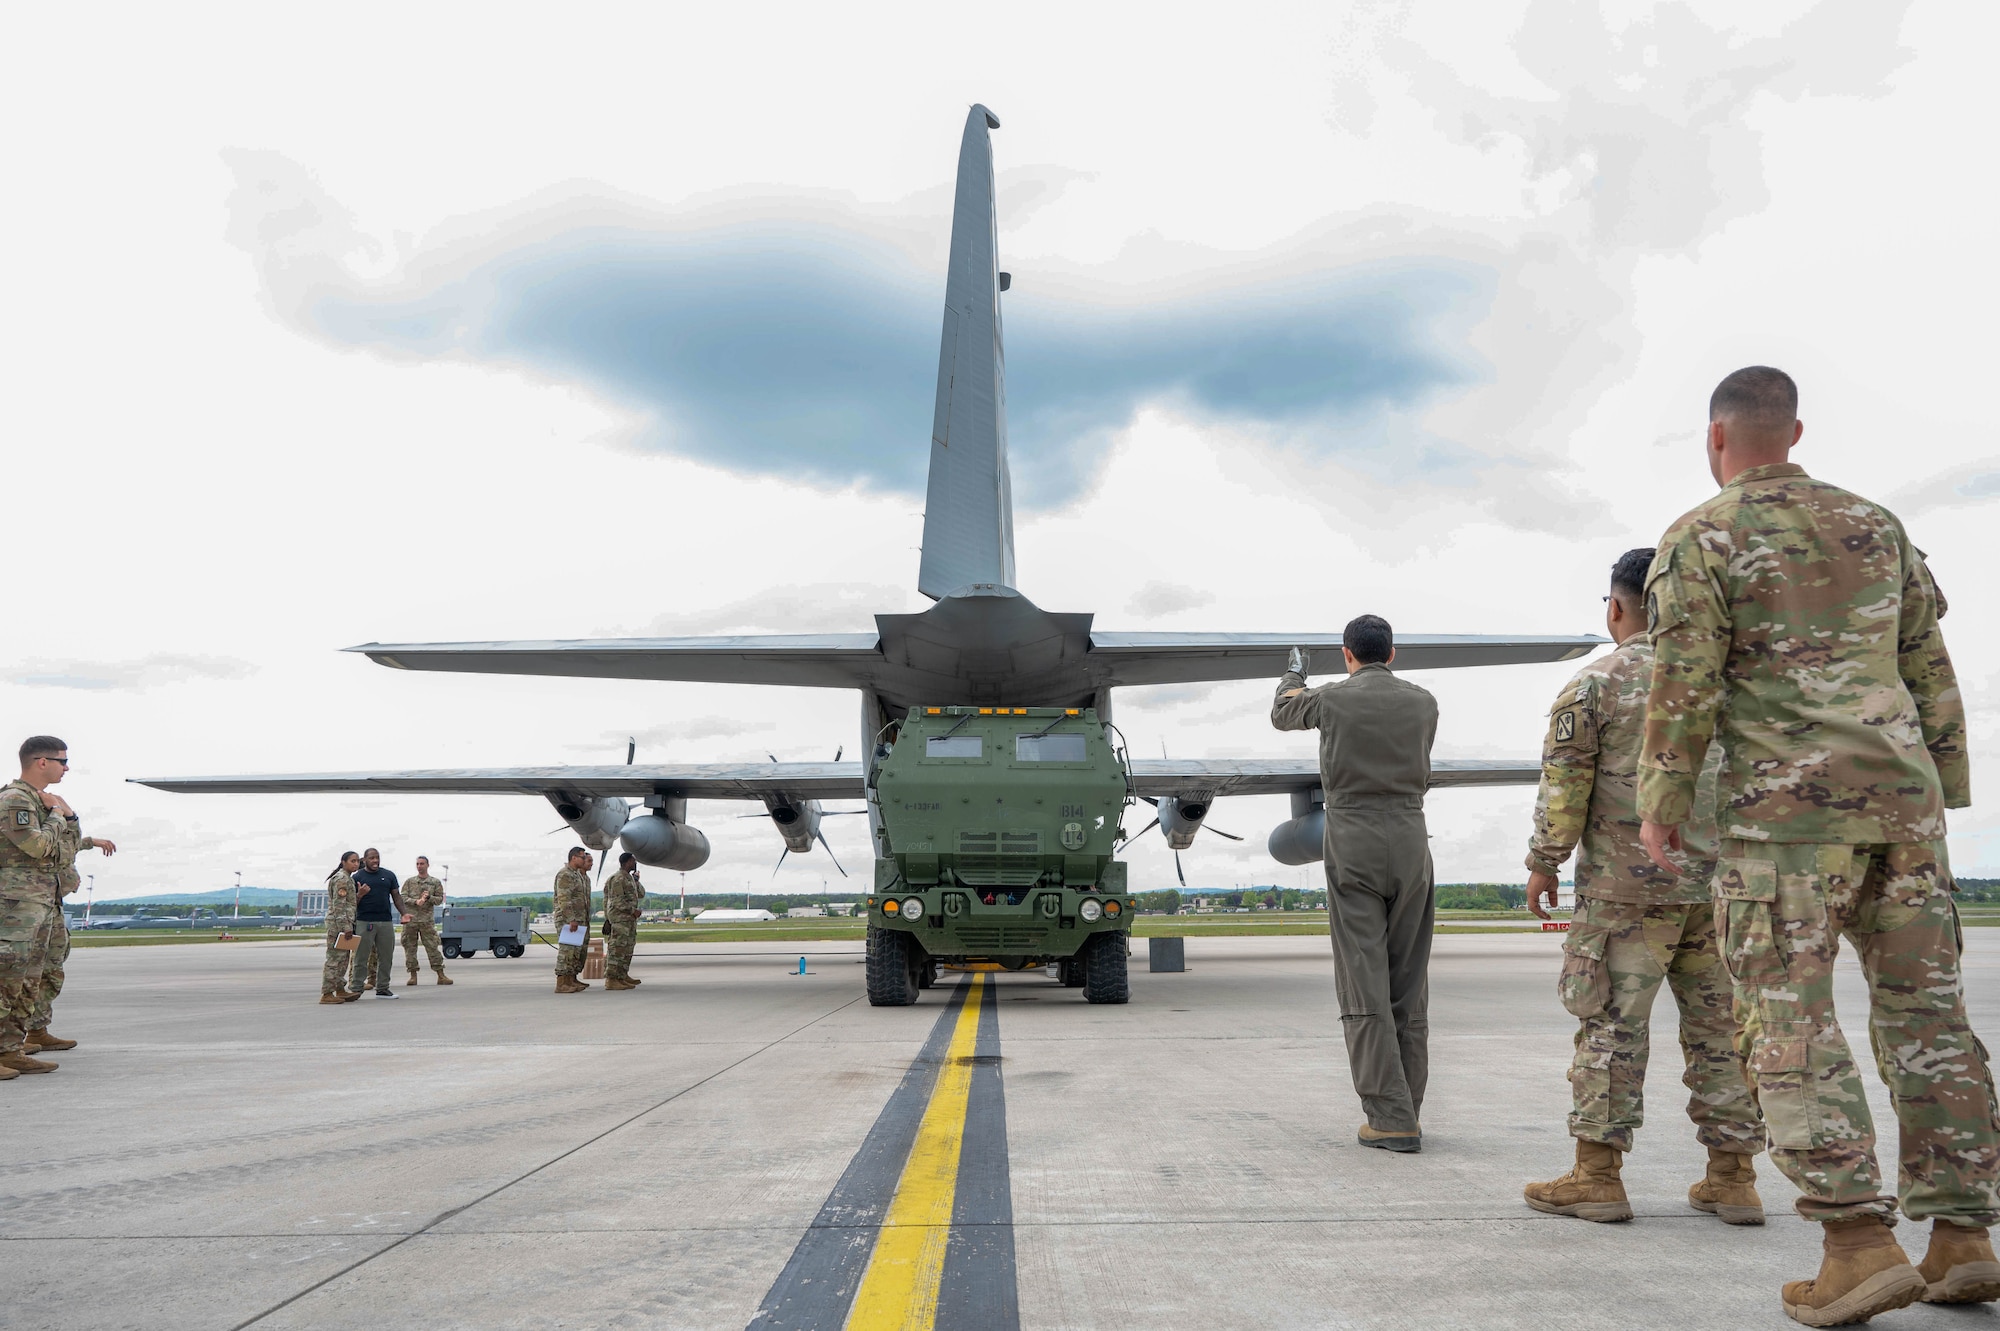 U.S. Army Soldiers assigned to the 4th Battalion,133rd Field Artillery Regiment, Texas Army National Guard, and the Tunisian Air Force train on the proper procedures for loading and lifting M142 High Mobility Artillery Rocket System on a TAF C-130J Super Hercules aircraft at Ramstein Air Base, Germany, May 4, 2024.